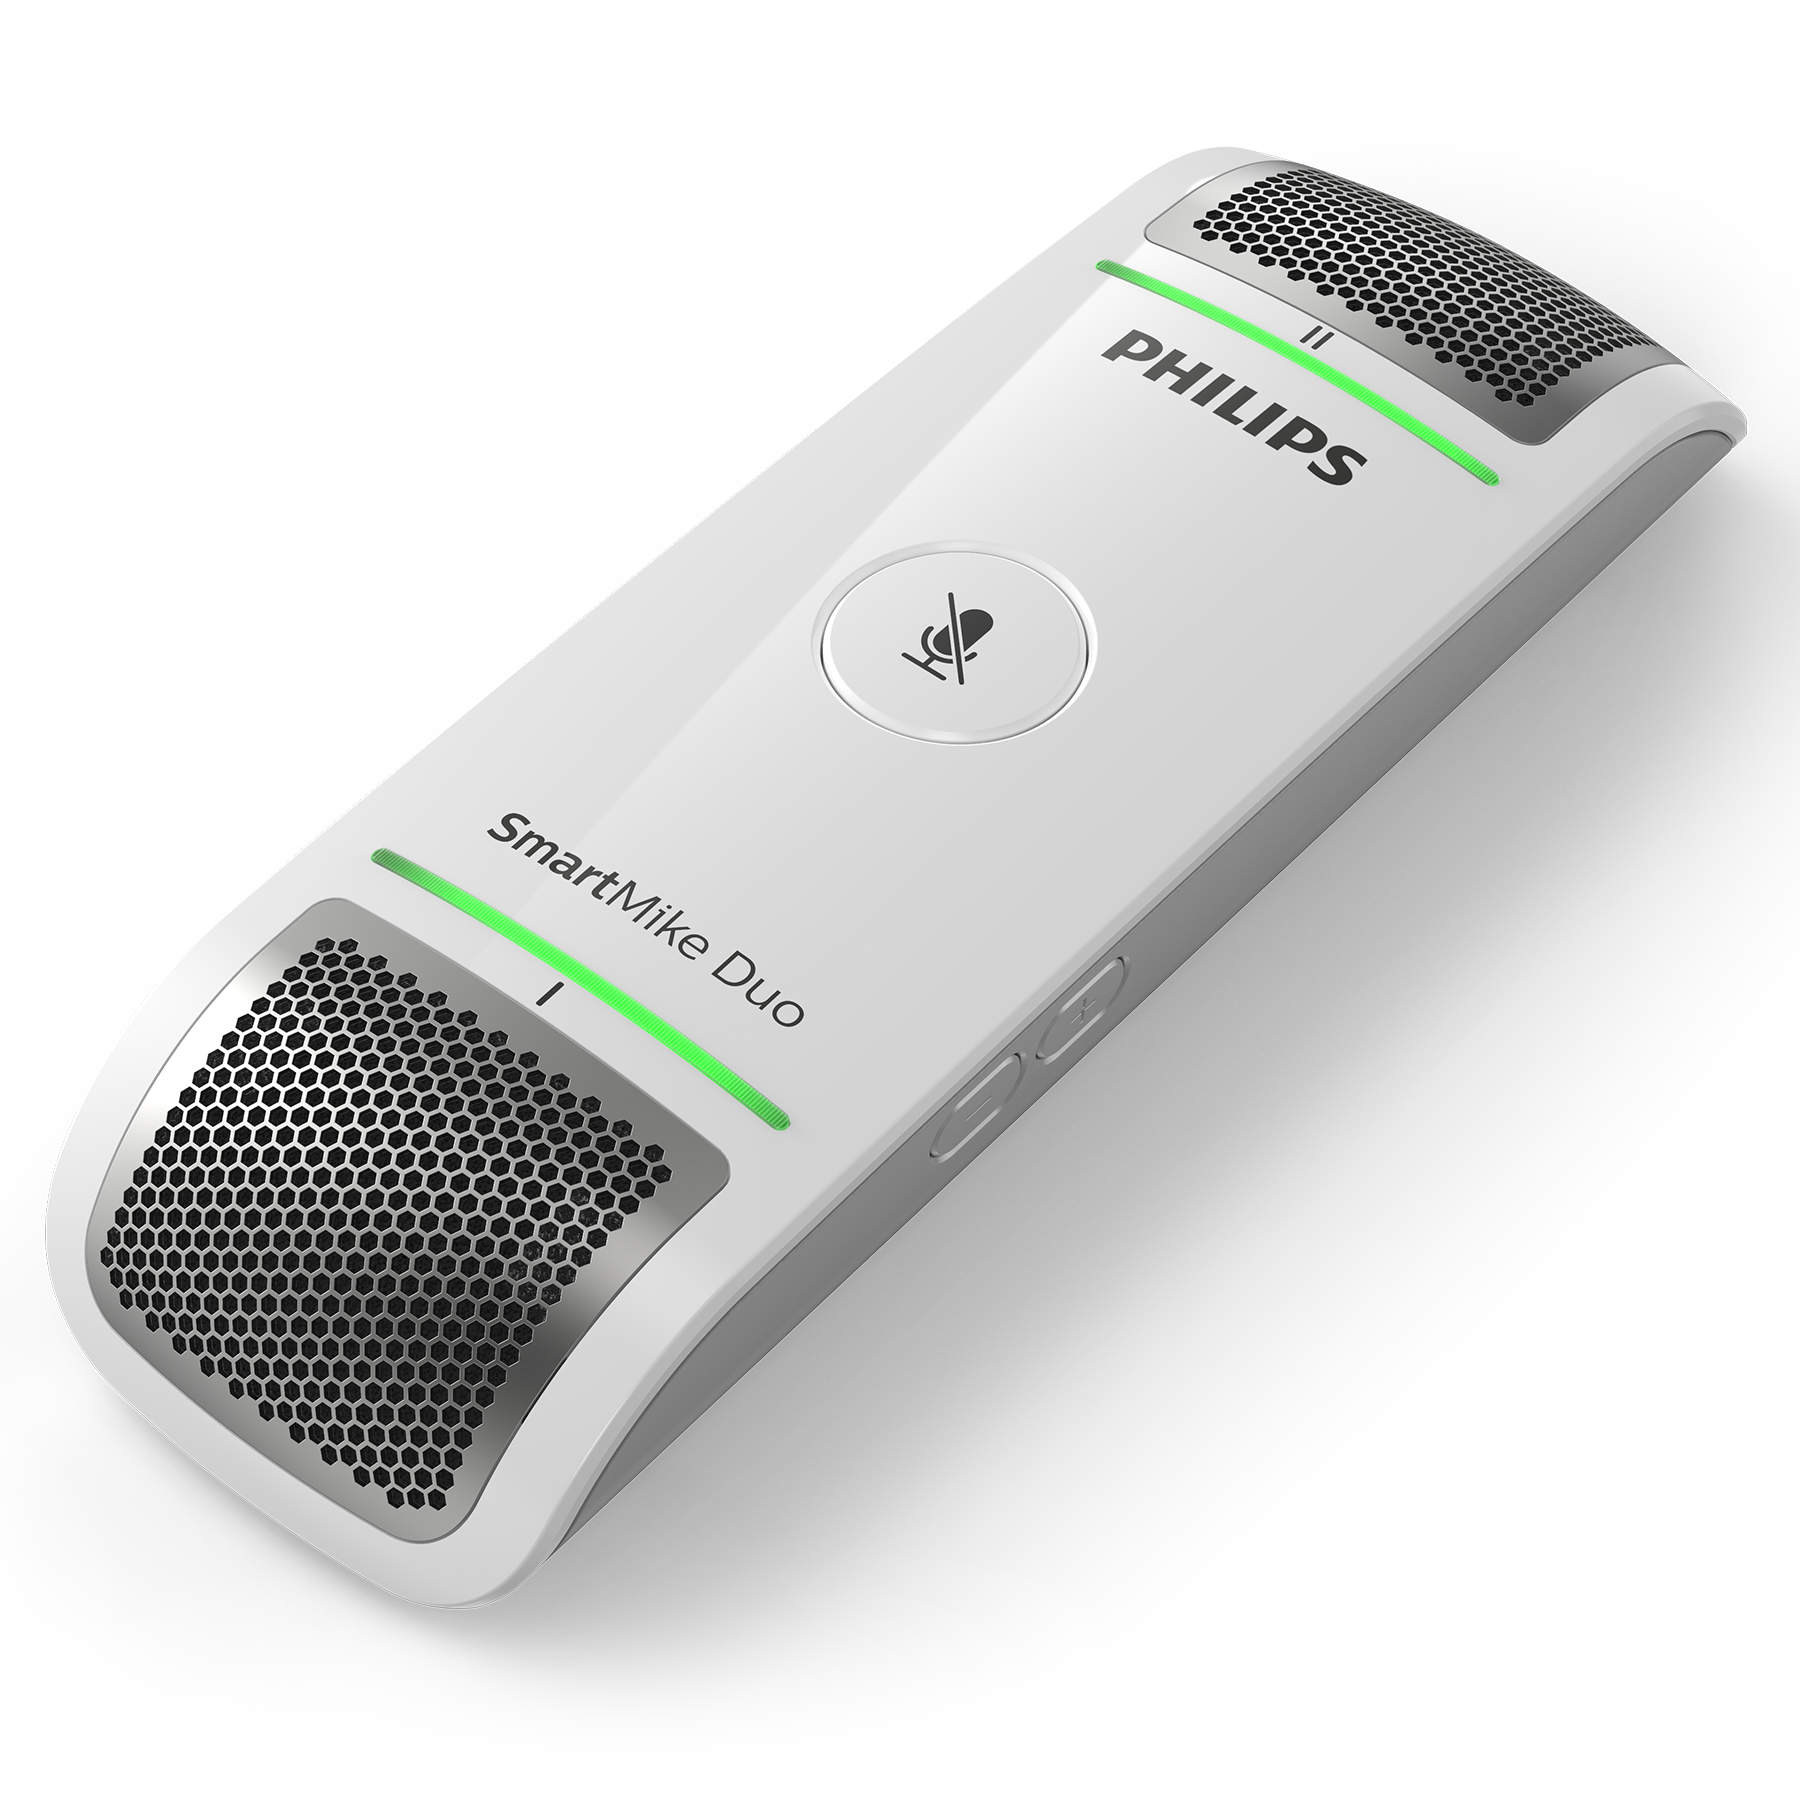 Philips PSM1000 SmartMike Duo Conversation Transcription Kit with SpeechLive + Speech to Text (12 Month Subscription)